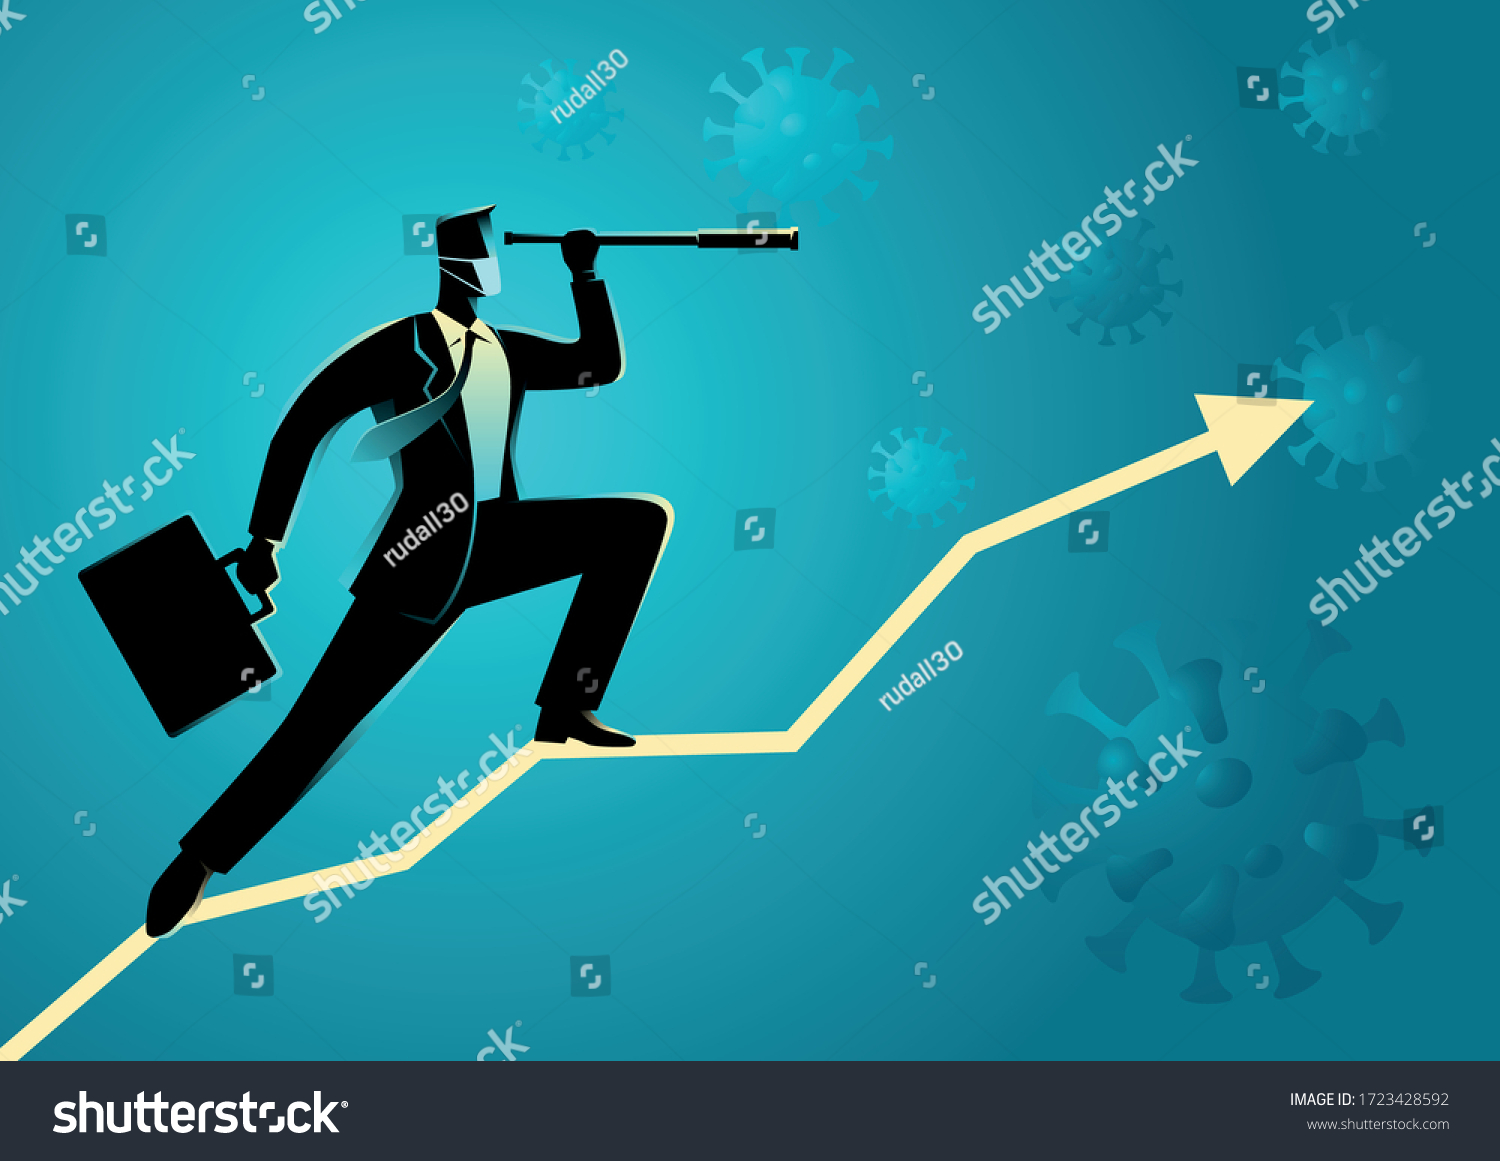 SVG of Business vector illustration of a businessman using telescope on graphic chart with covid-19 on the background. Covid-19 impacts to business svg